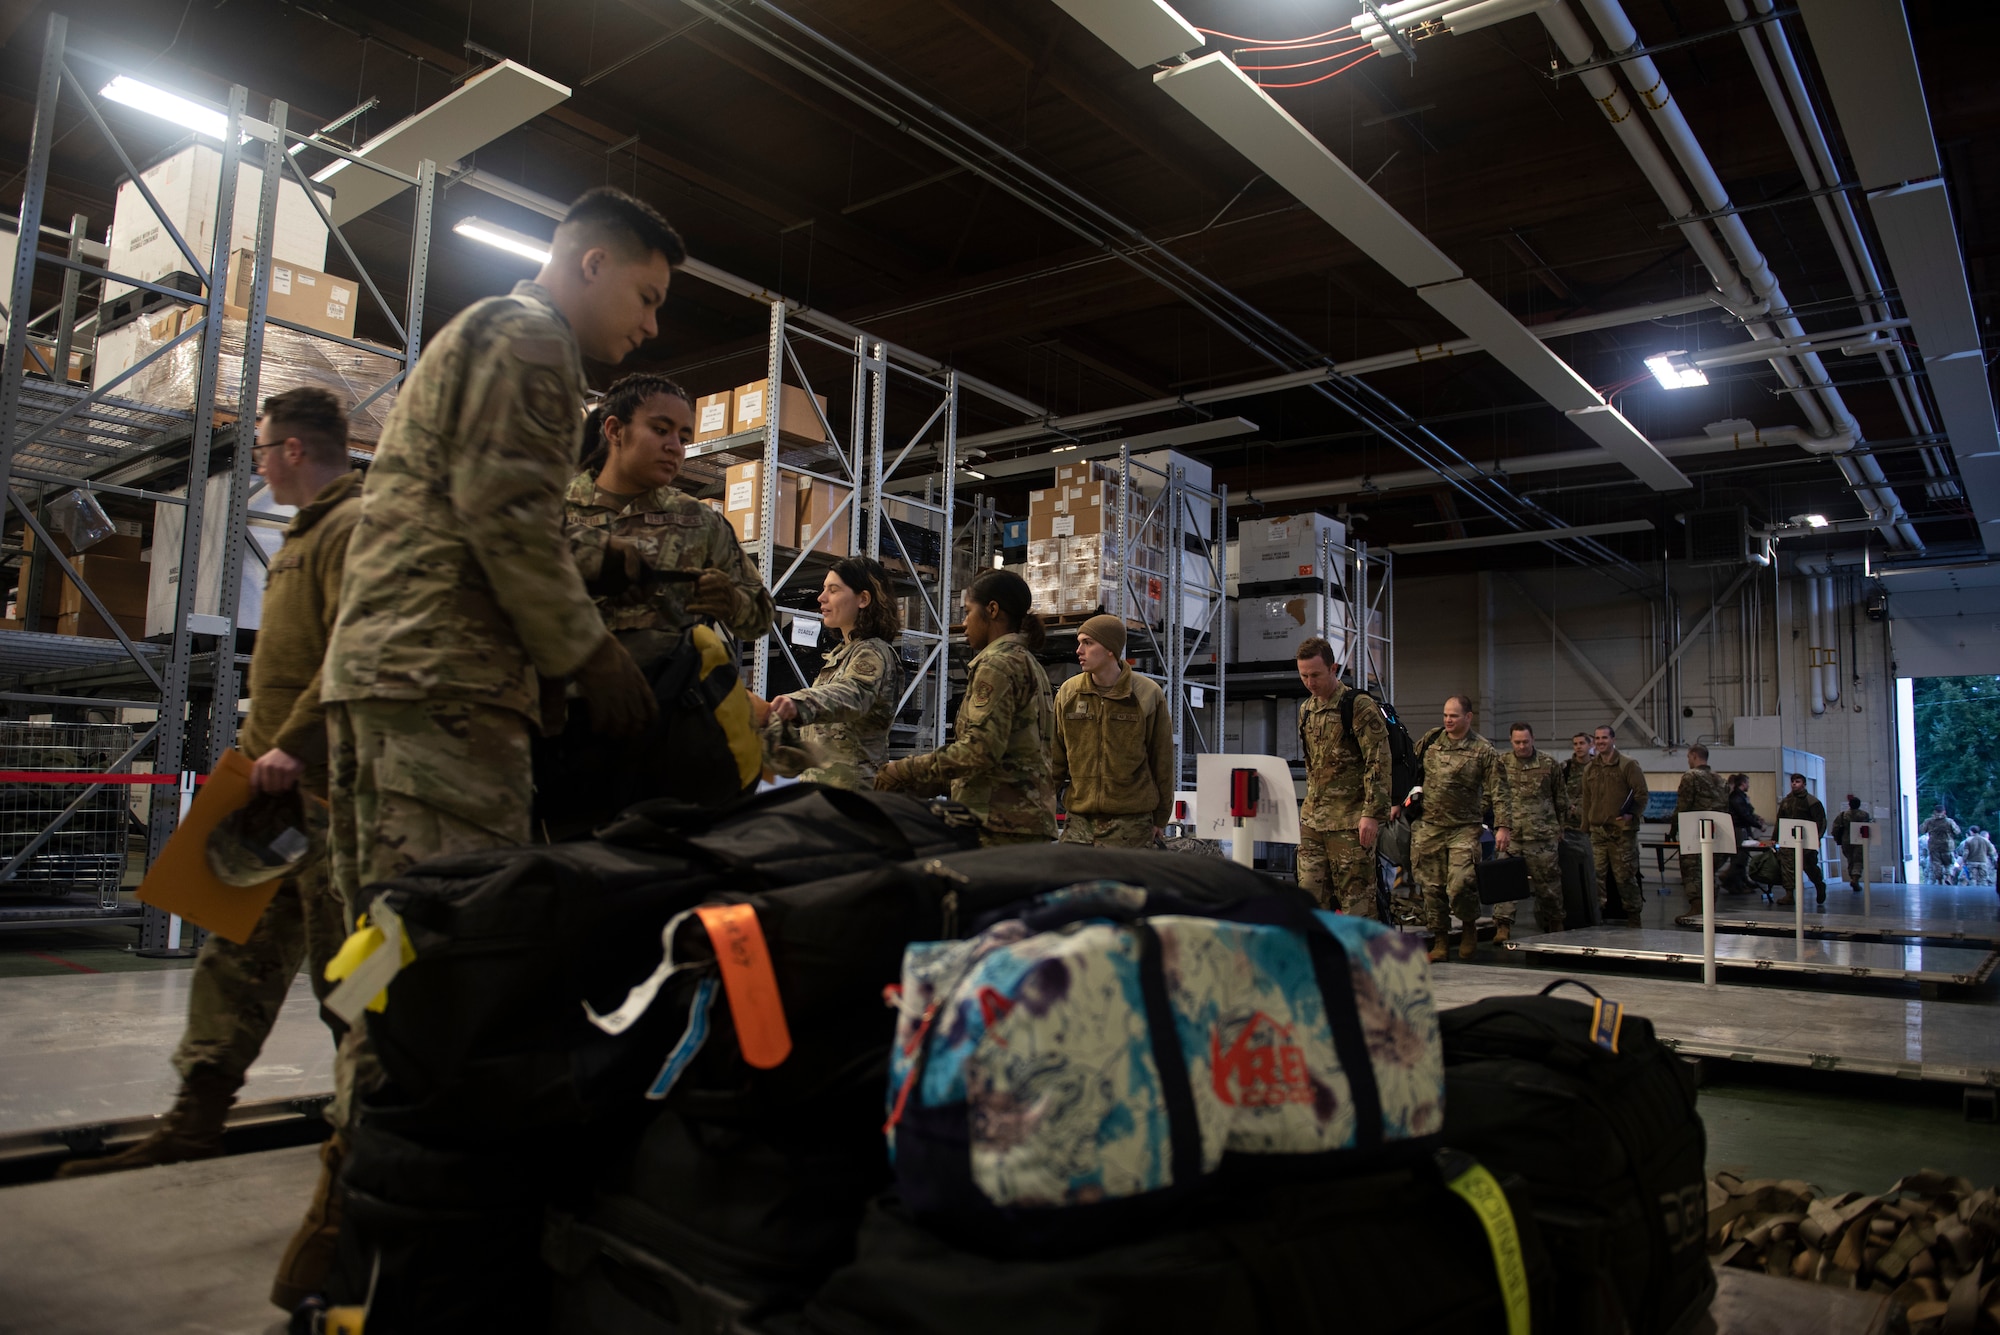 U.S. Air Force Airmen with the 62nd Aerial Port Squadron organize deployers’ personal bags in preparation for Exercise Rainier War 22A at Joint Base Lewis-McChord, Washington, March 15, 2022. Rainier War 22A exercised and evaluated the wing’s ability to employ the force and its  ability to perform during wartime and/or contingency taskings in a high-intensity, wartime contested, degraded and operationally limited environment while supporting the contingency operations against a near-peer adversary. (U.S. Air Force photo by Master Sgt. Julius Delos Reyes)